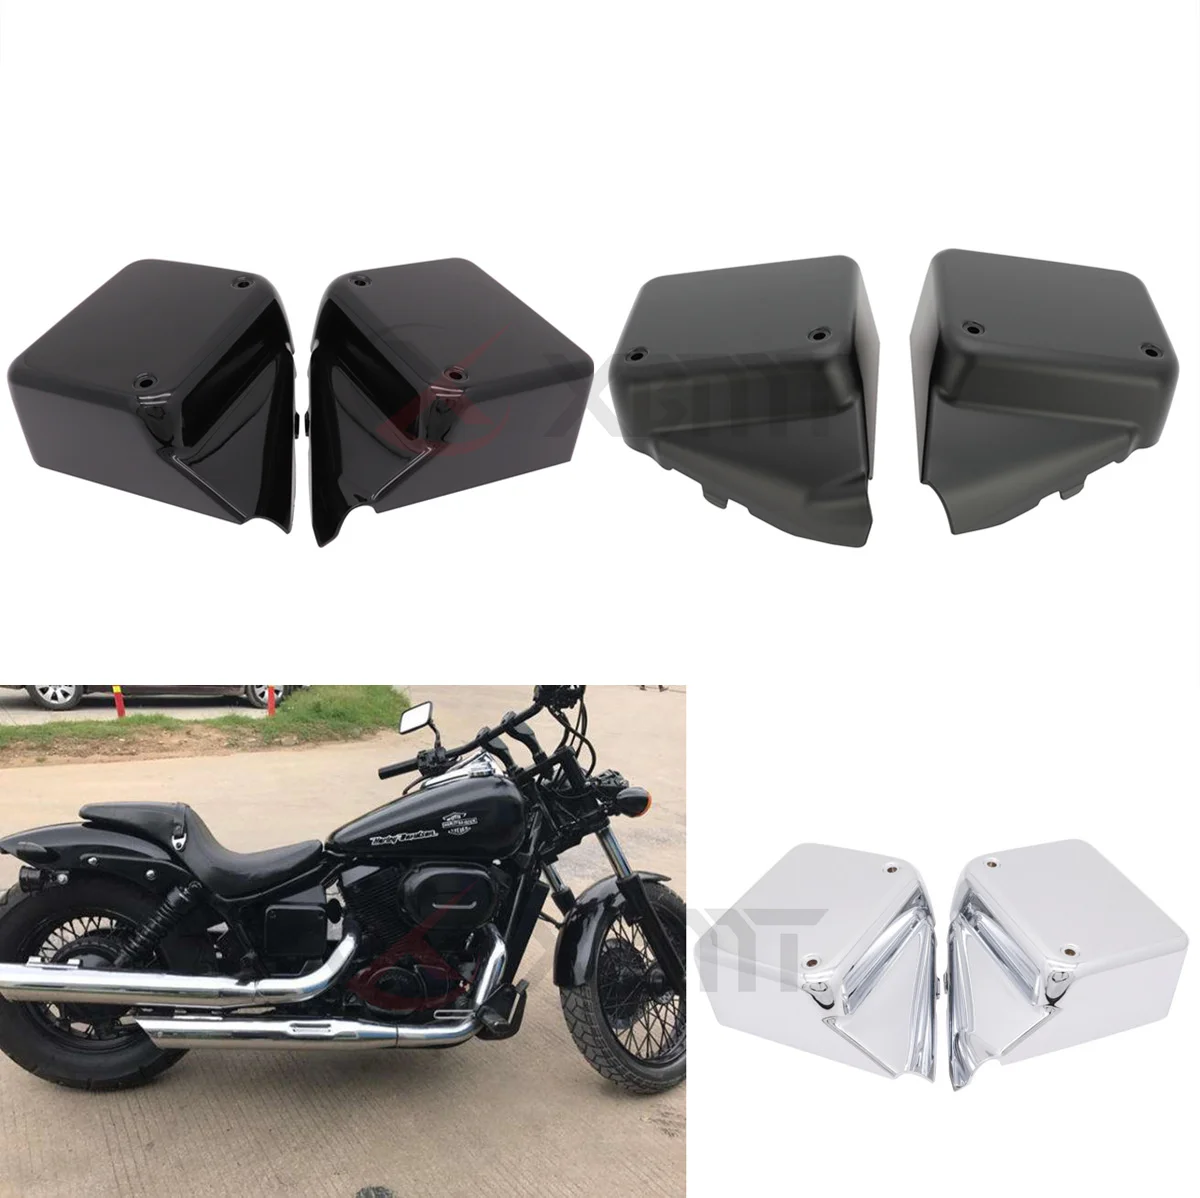 Motorcycle Left Right Side Fairing Battery Cover For Honda Shadow Spirit 750 VT750 DC VT750DC 2000-2009 Black Widow 2000-2007